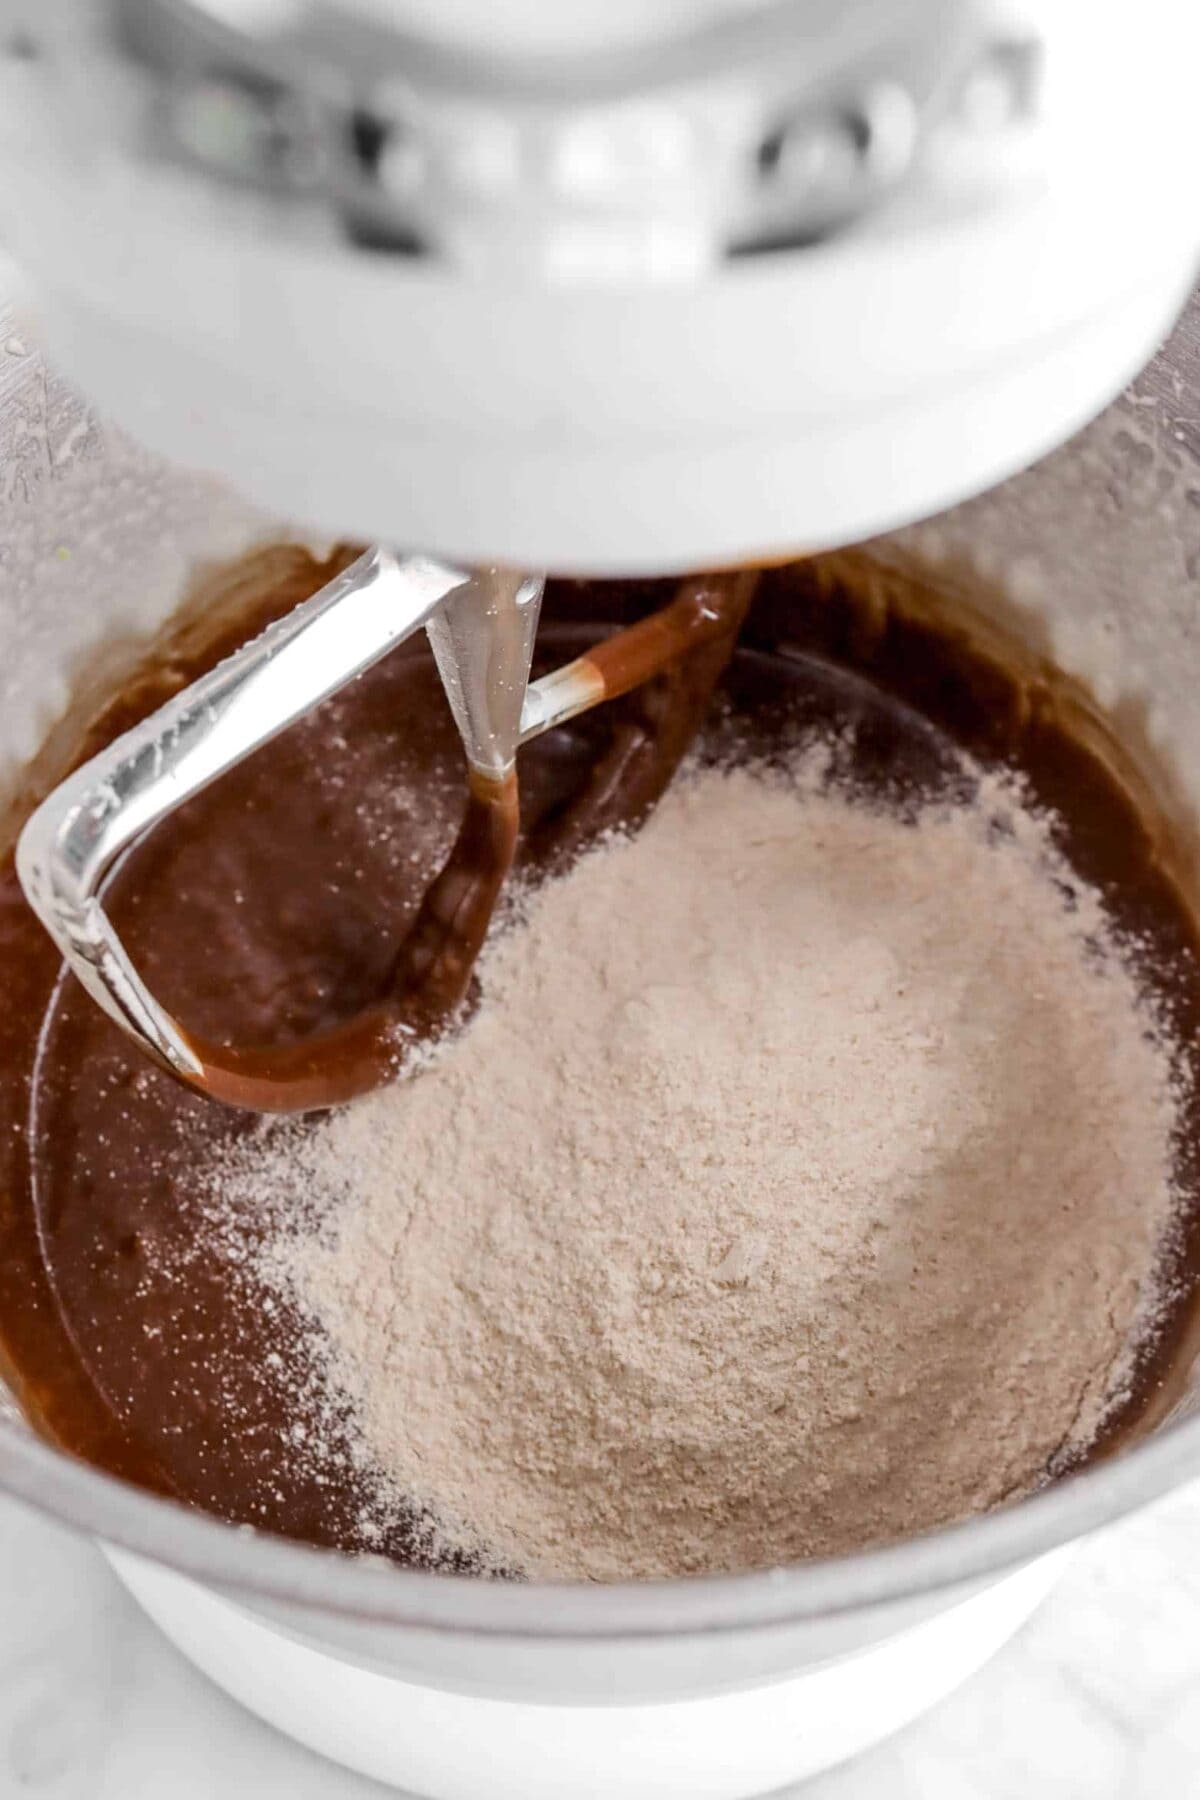 whole wheat flour added to chocolate mixture